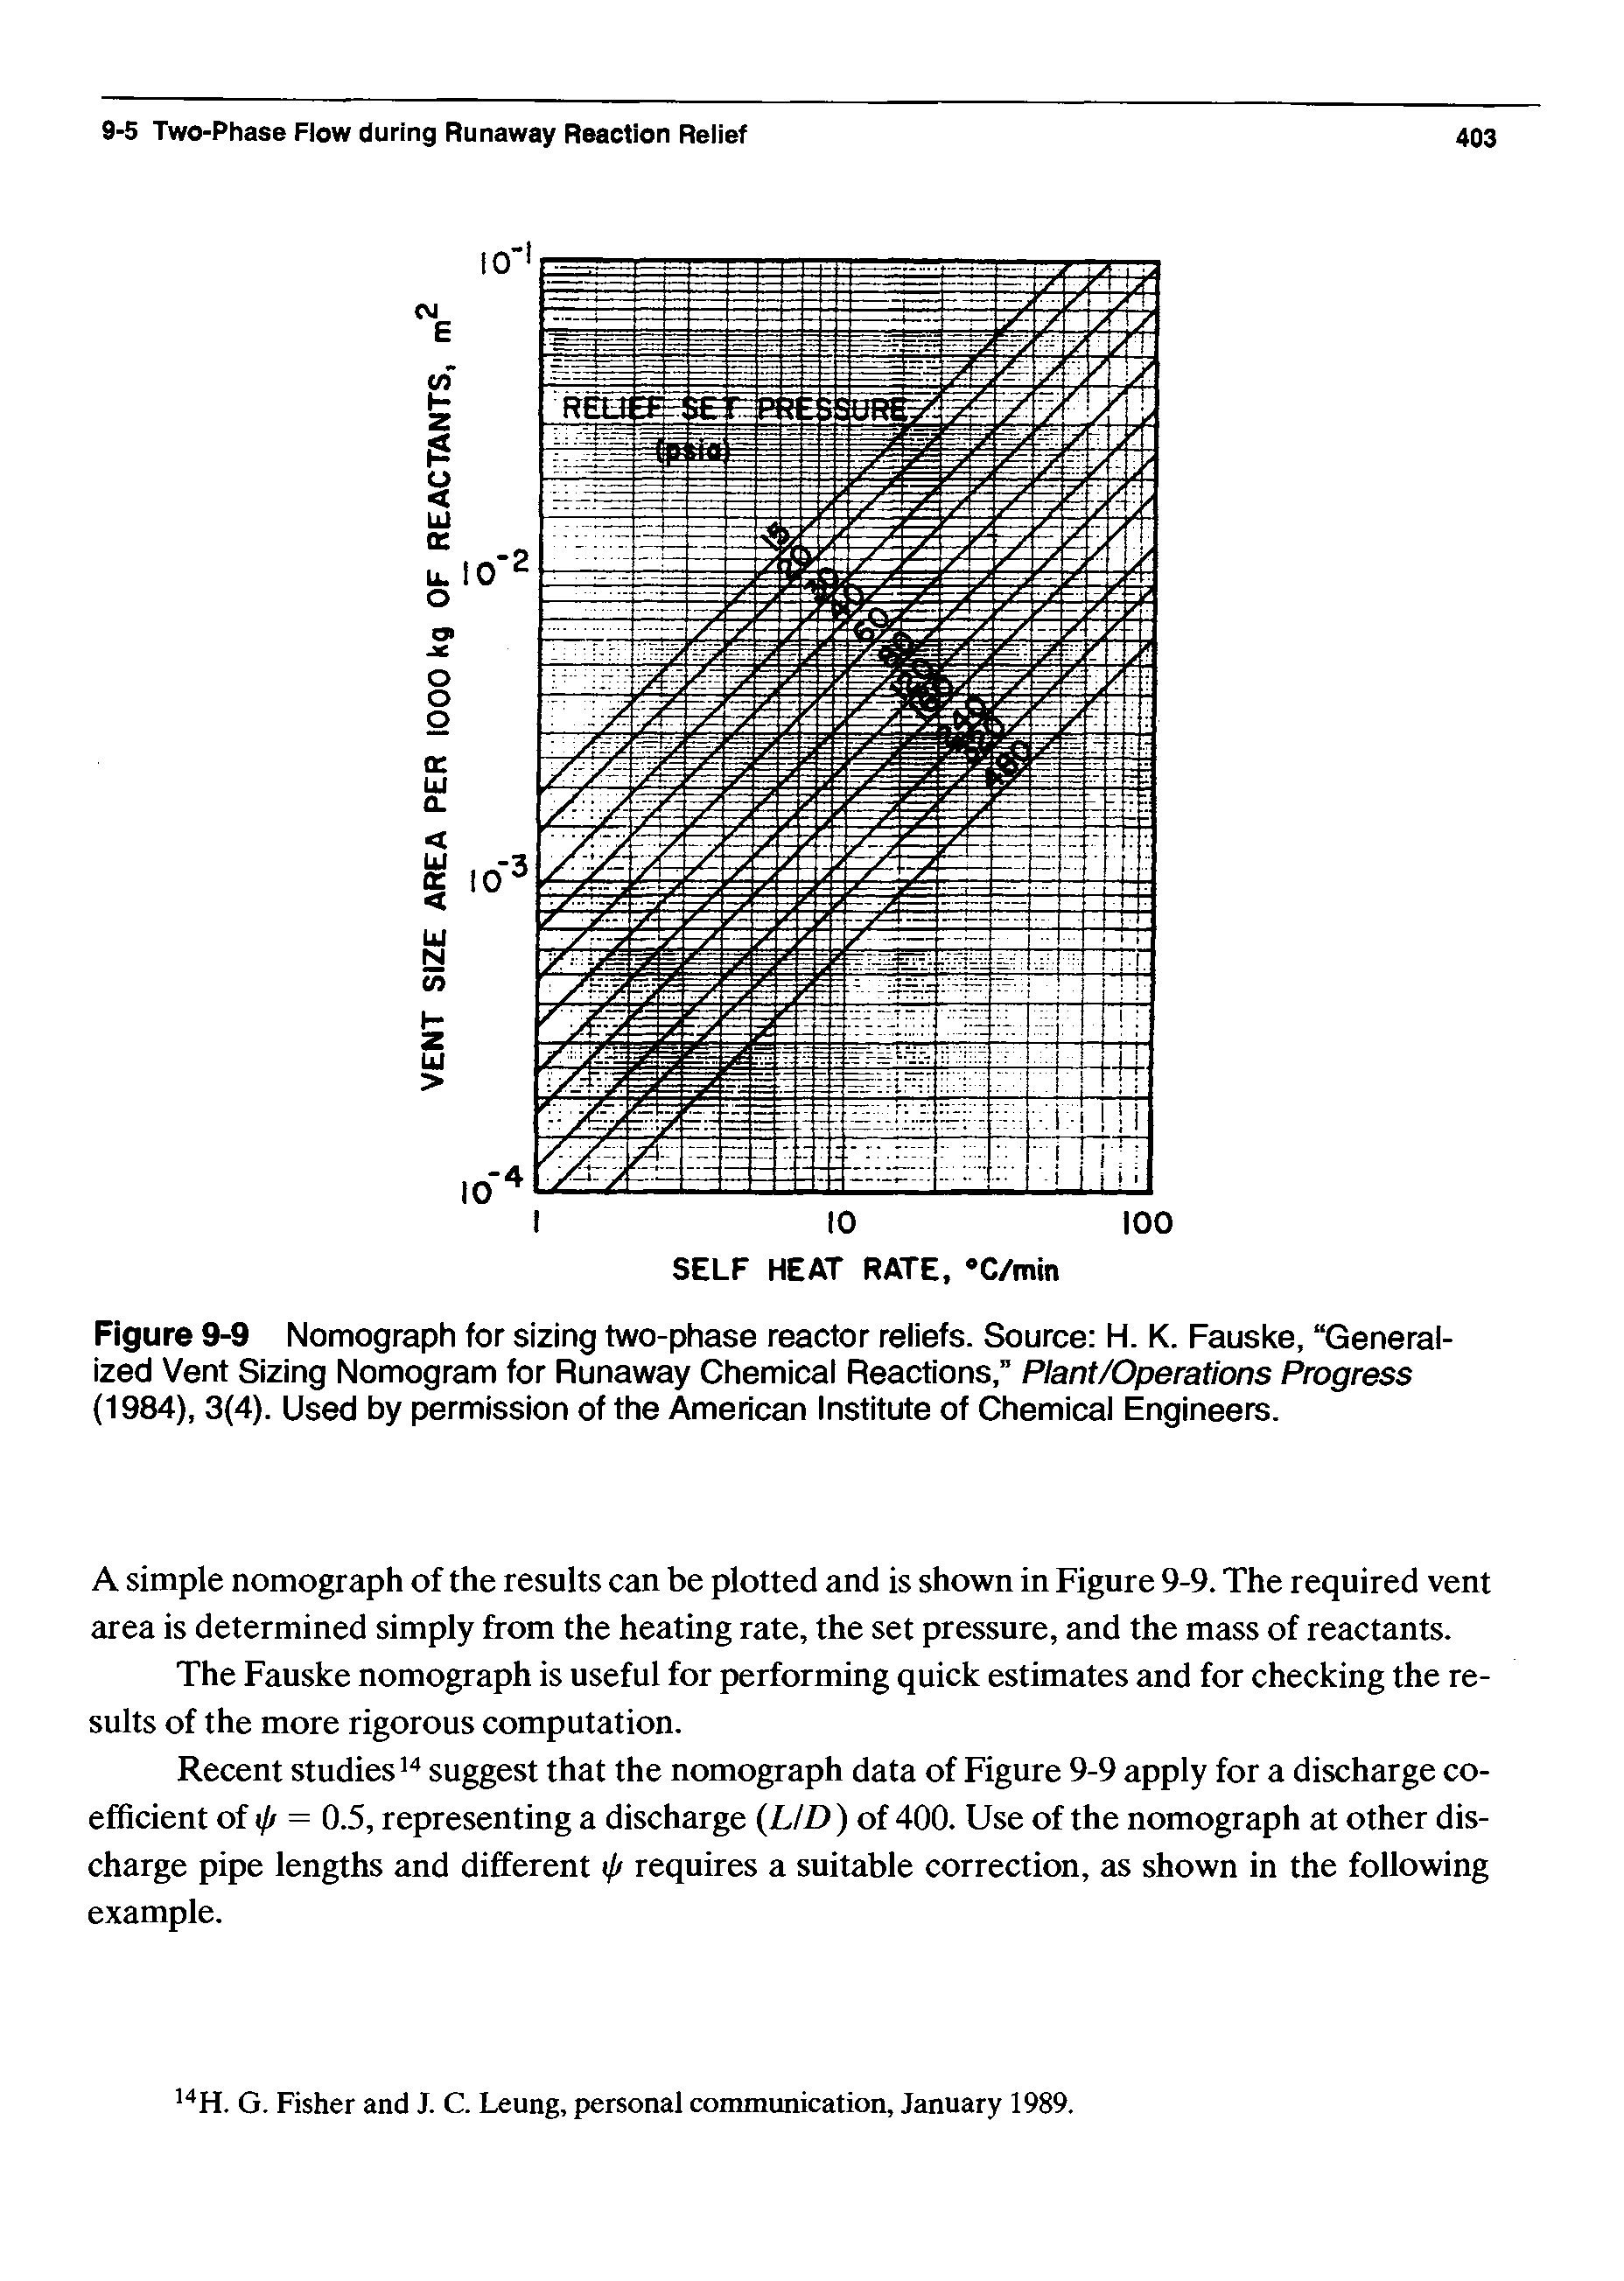 Figure 9-9 Nomograph for sizing two-phase reactor reliefs. Source H. K. Fauske, Generalized Vent Sizing Nomogram for Runaway Chemical Reactions, Plant/Operations Progress (1984), 3(4). Used by permission of the American Institute of Chemical Engineers.